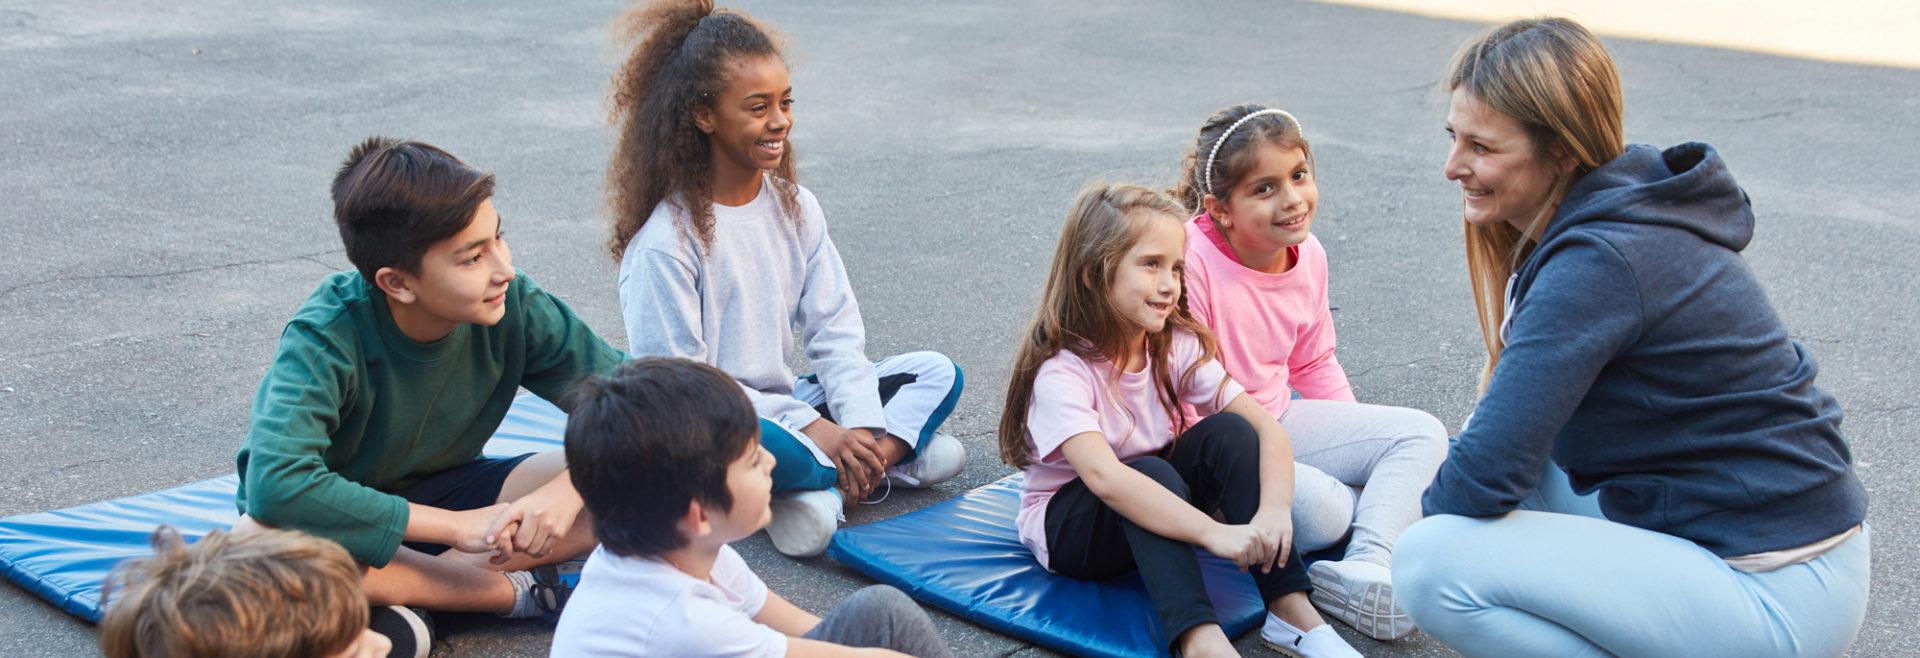 young children sitting on yoga mats listening to the instructor